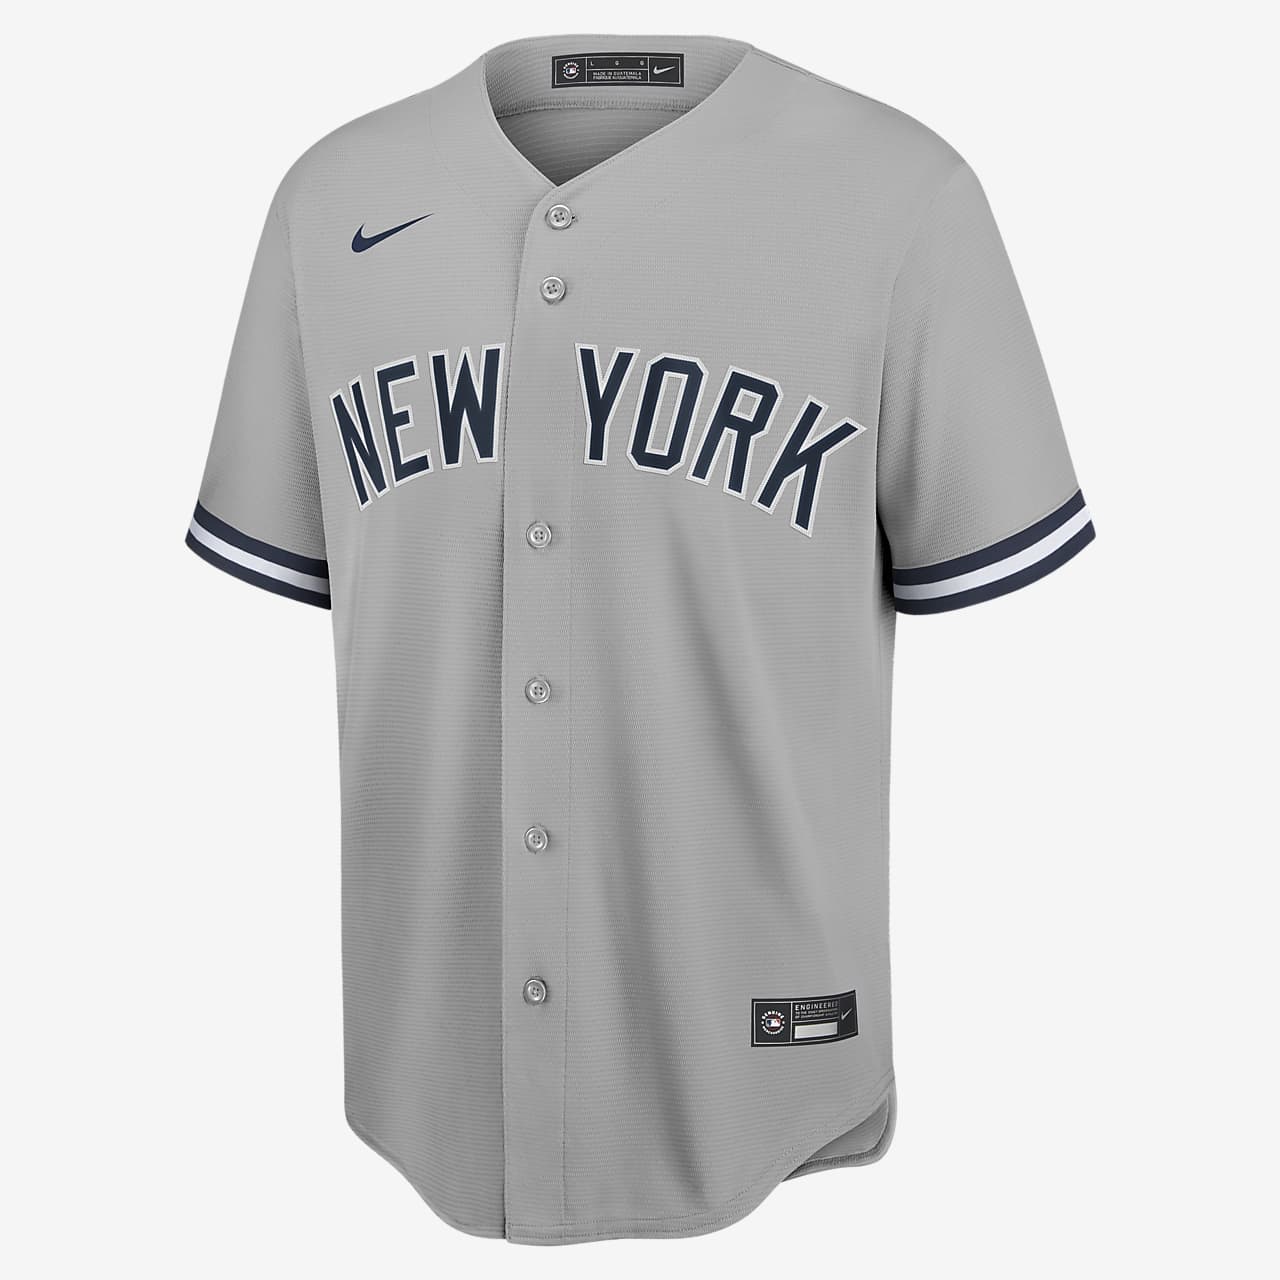 black and white yankees jersey